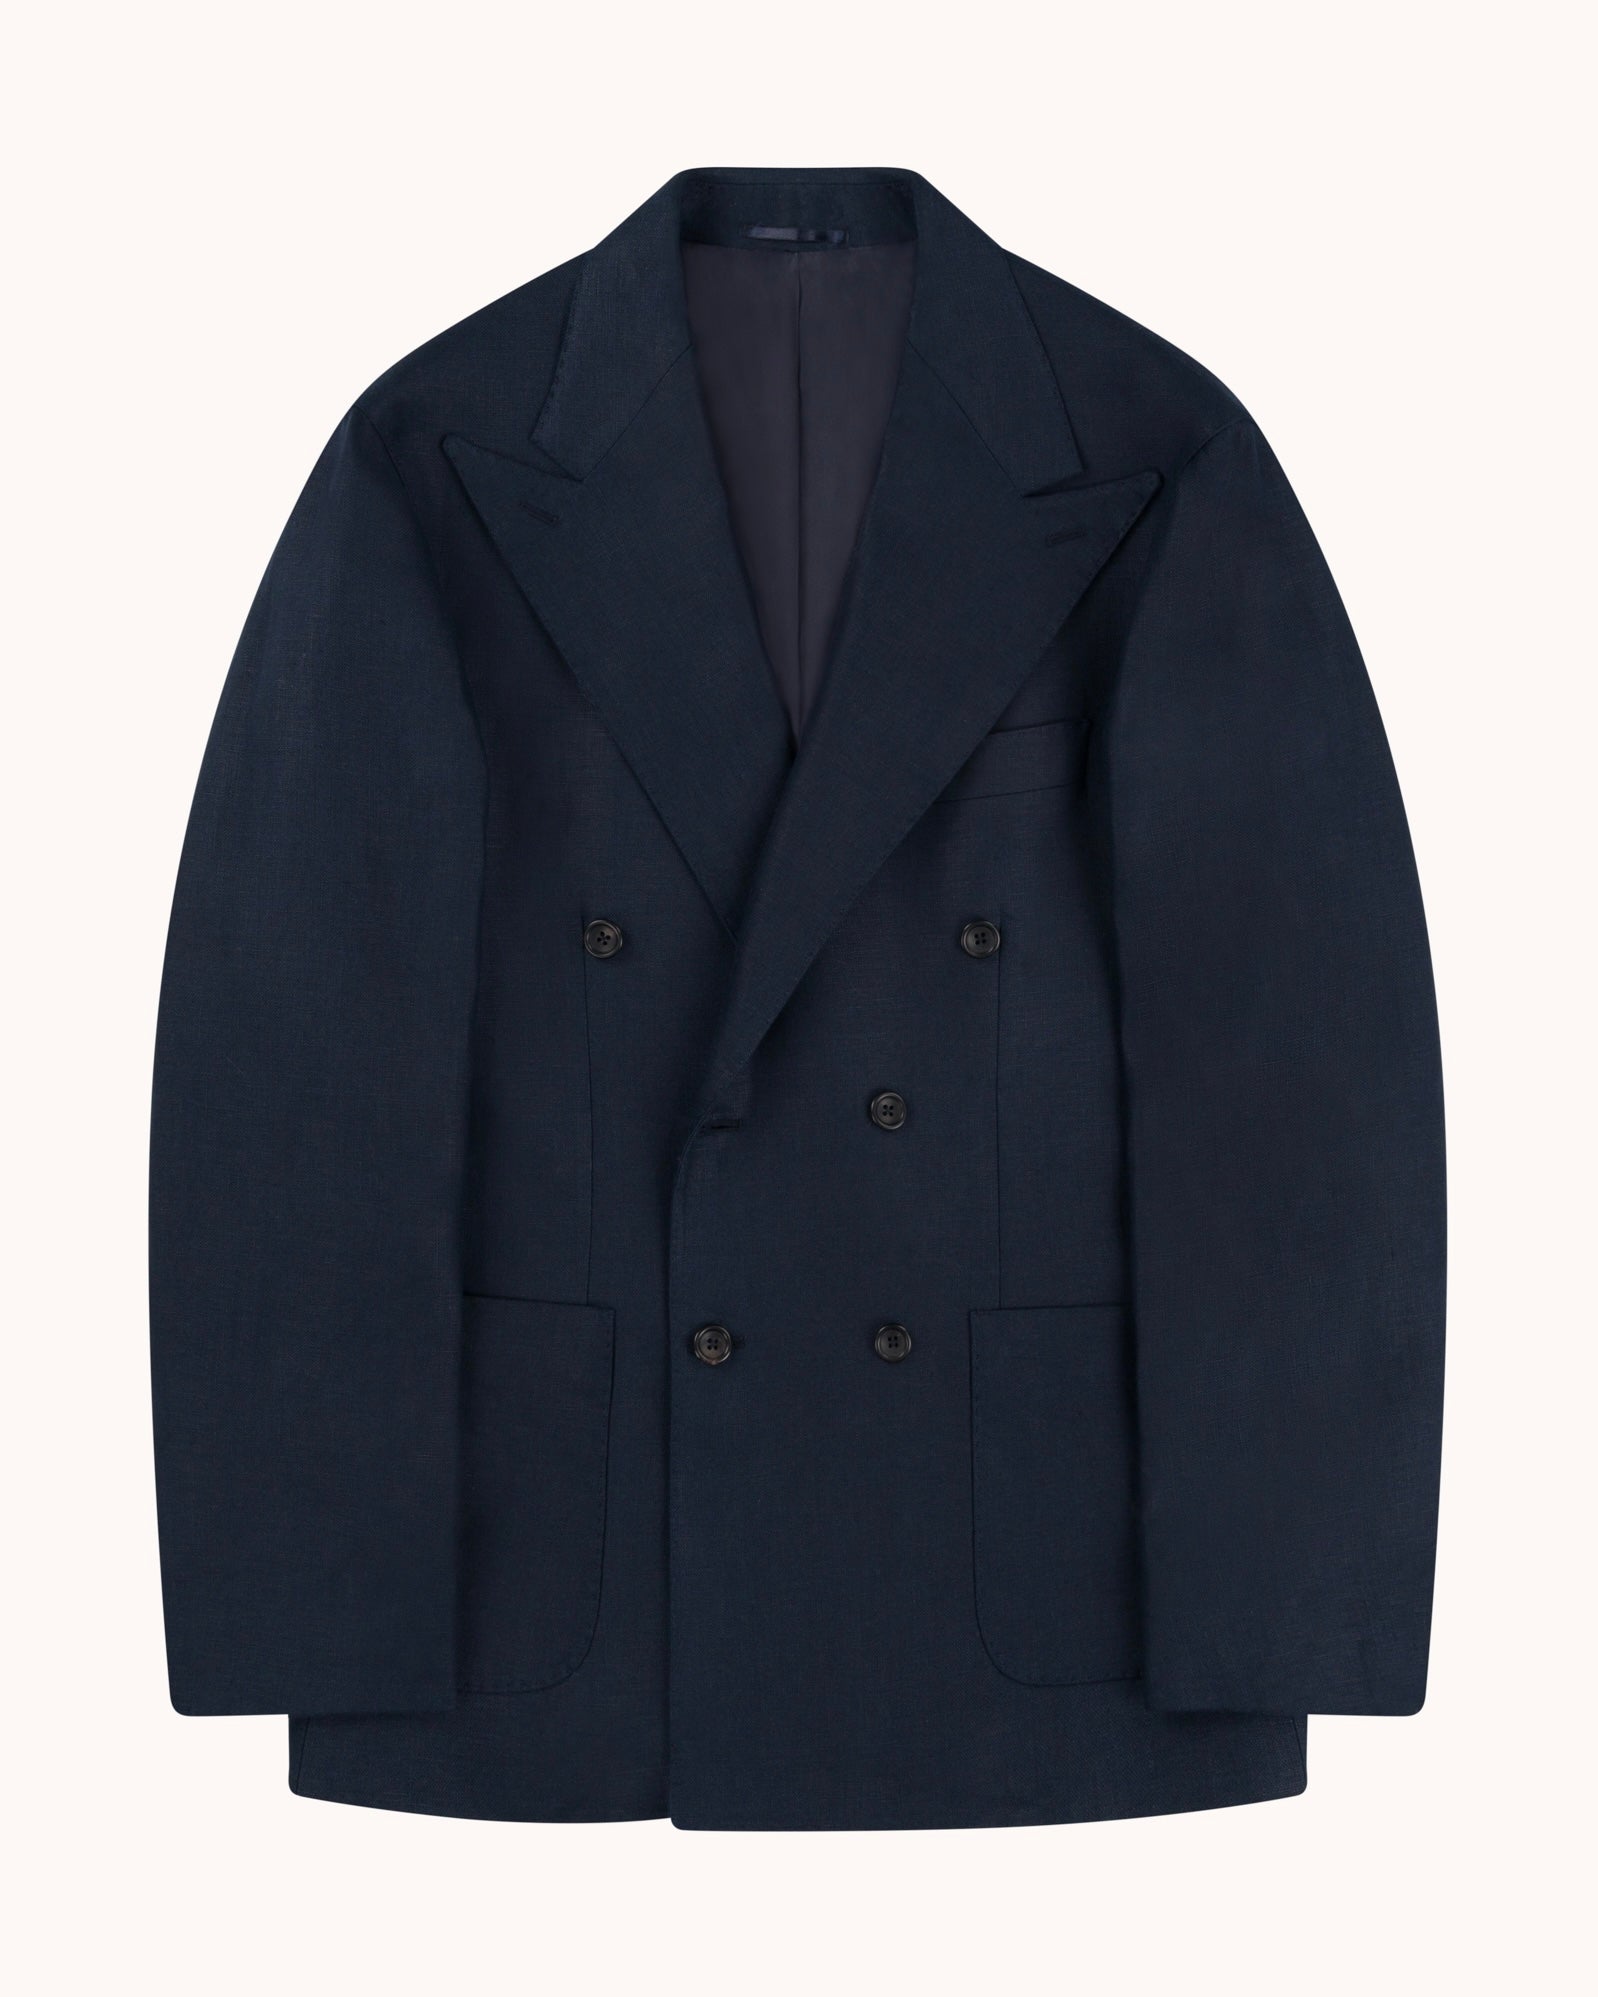 Double Breasted Sport Jacket - Navy Linen